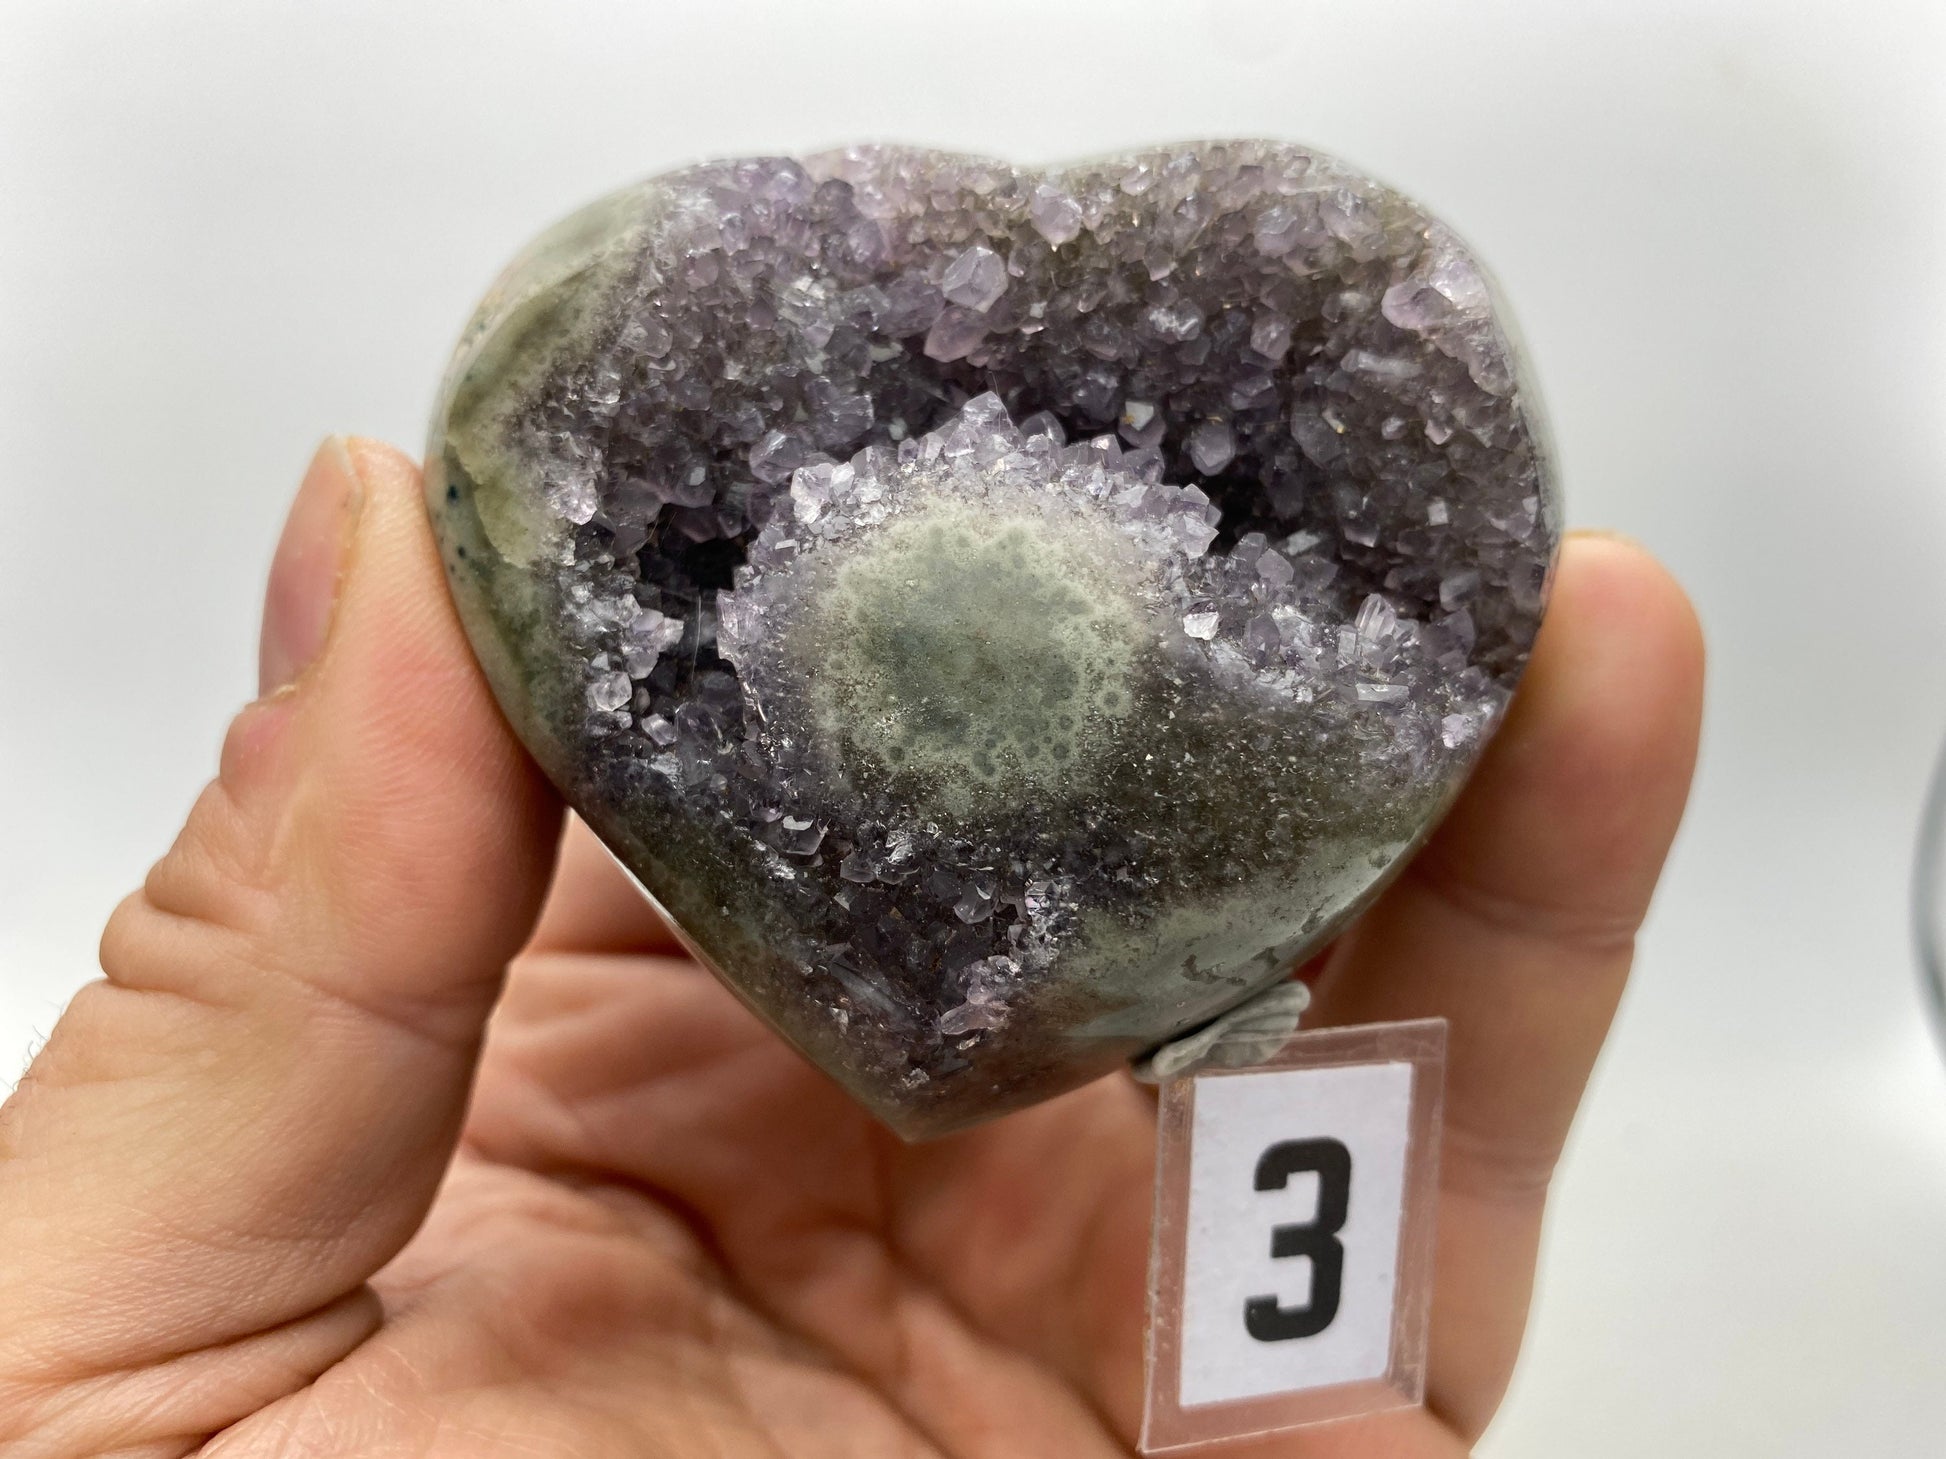 Heart-shaped Amethyst carving